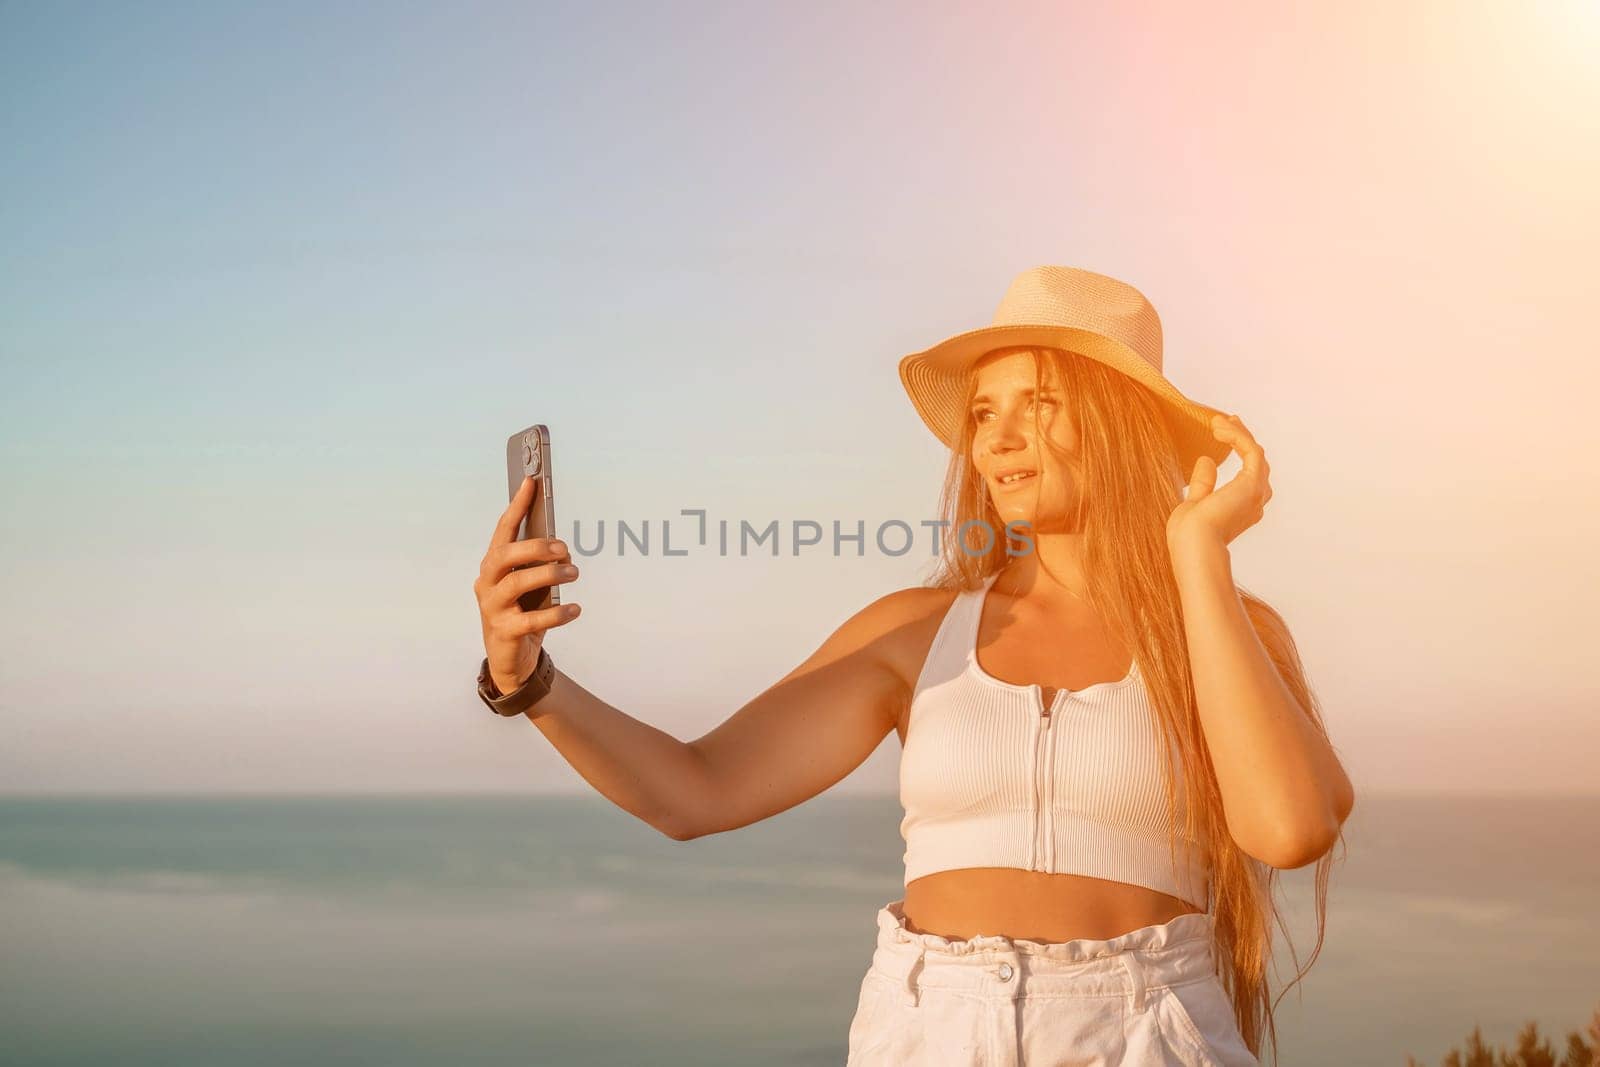 Selfie woman in a hat, white tank top, and shorts captures a selfie shot with her mobile phone against the backdrop of a serene beach and blue sea